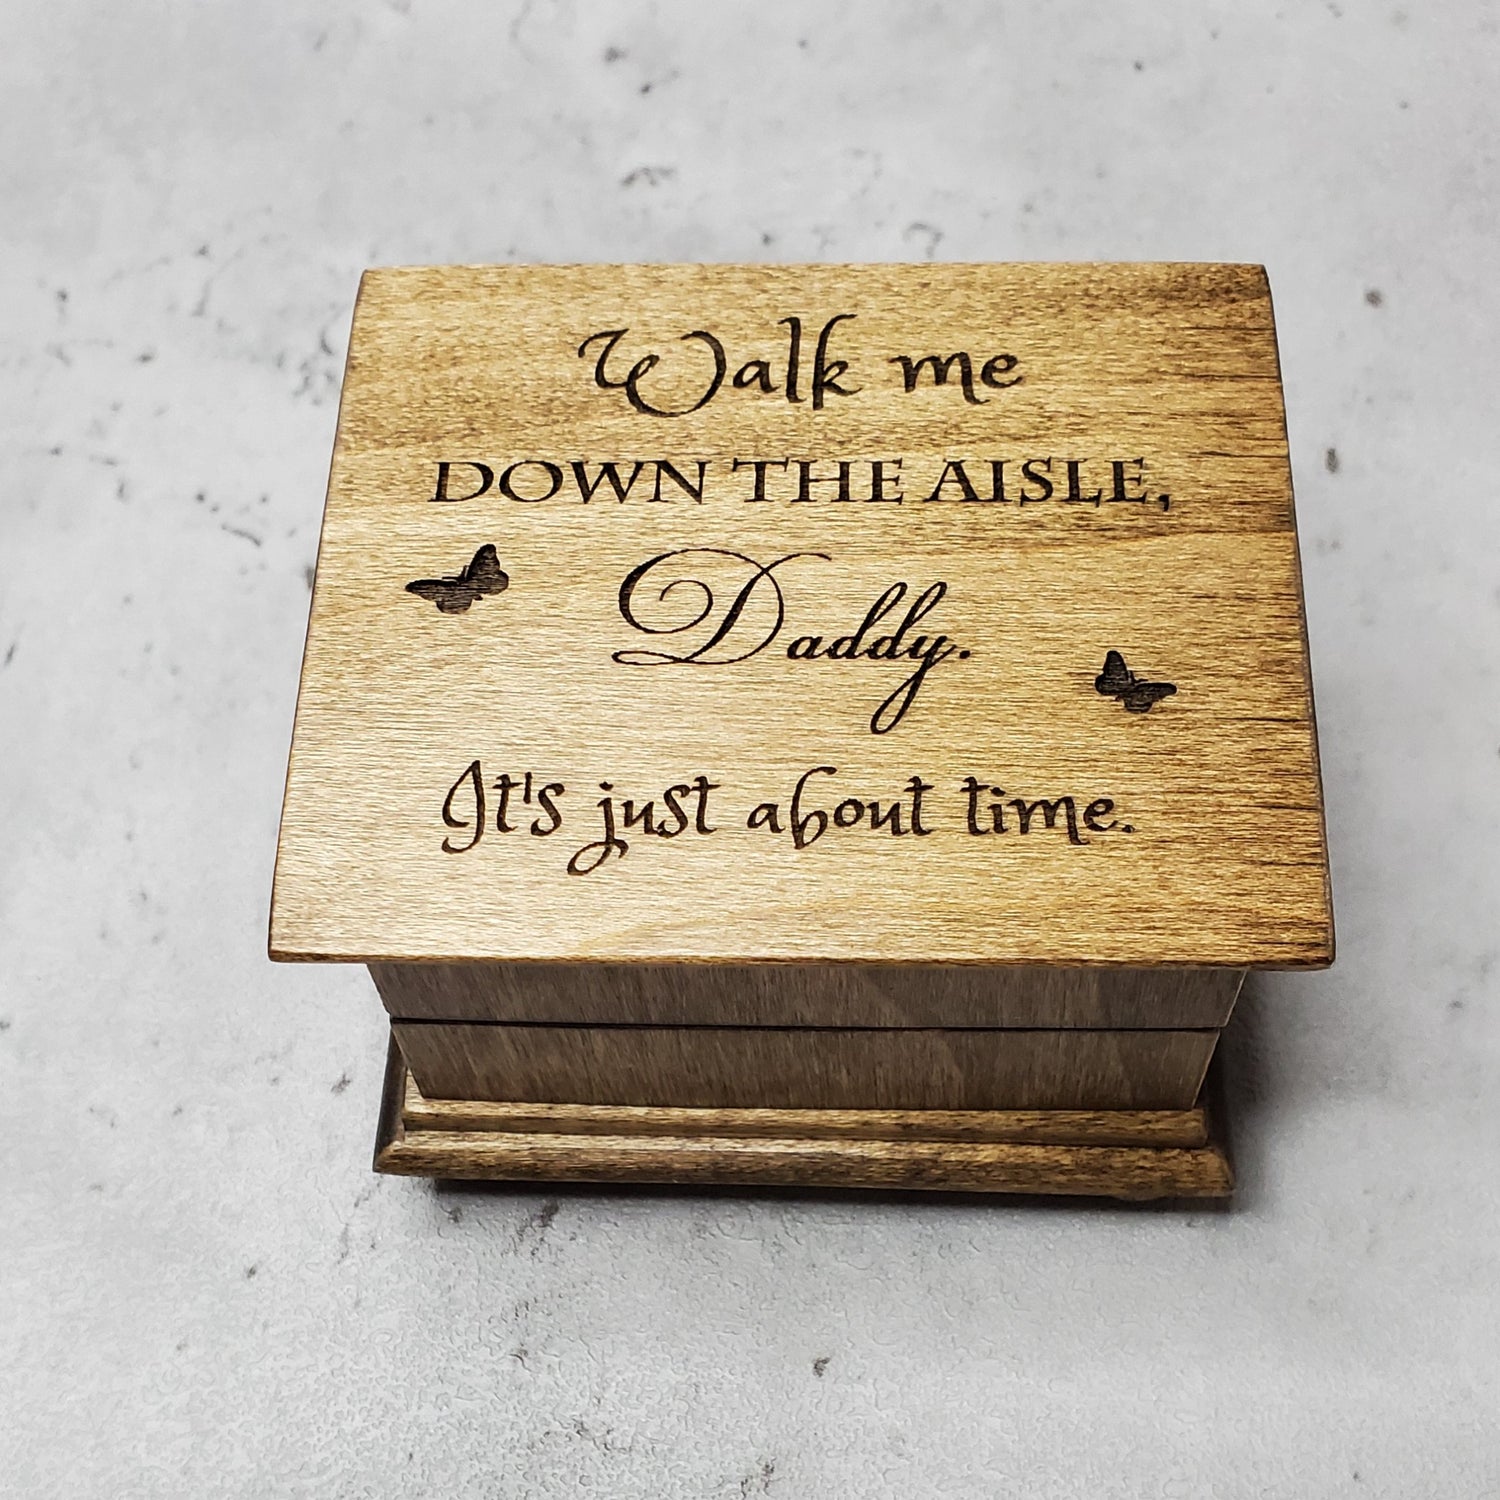 Father of Bride gift, music box engraved Walk me down the aisle Daddy, It's just about time. 